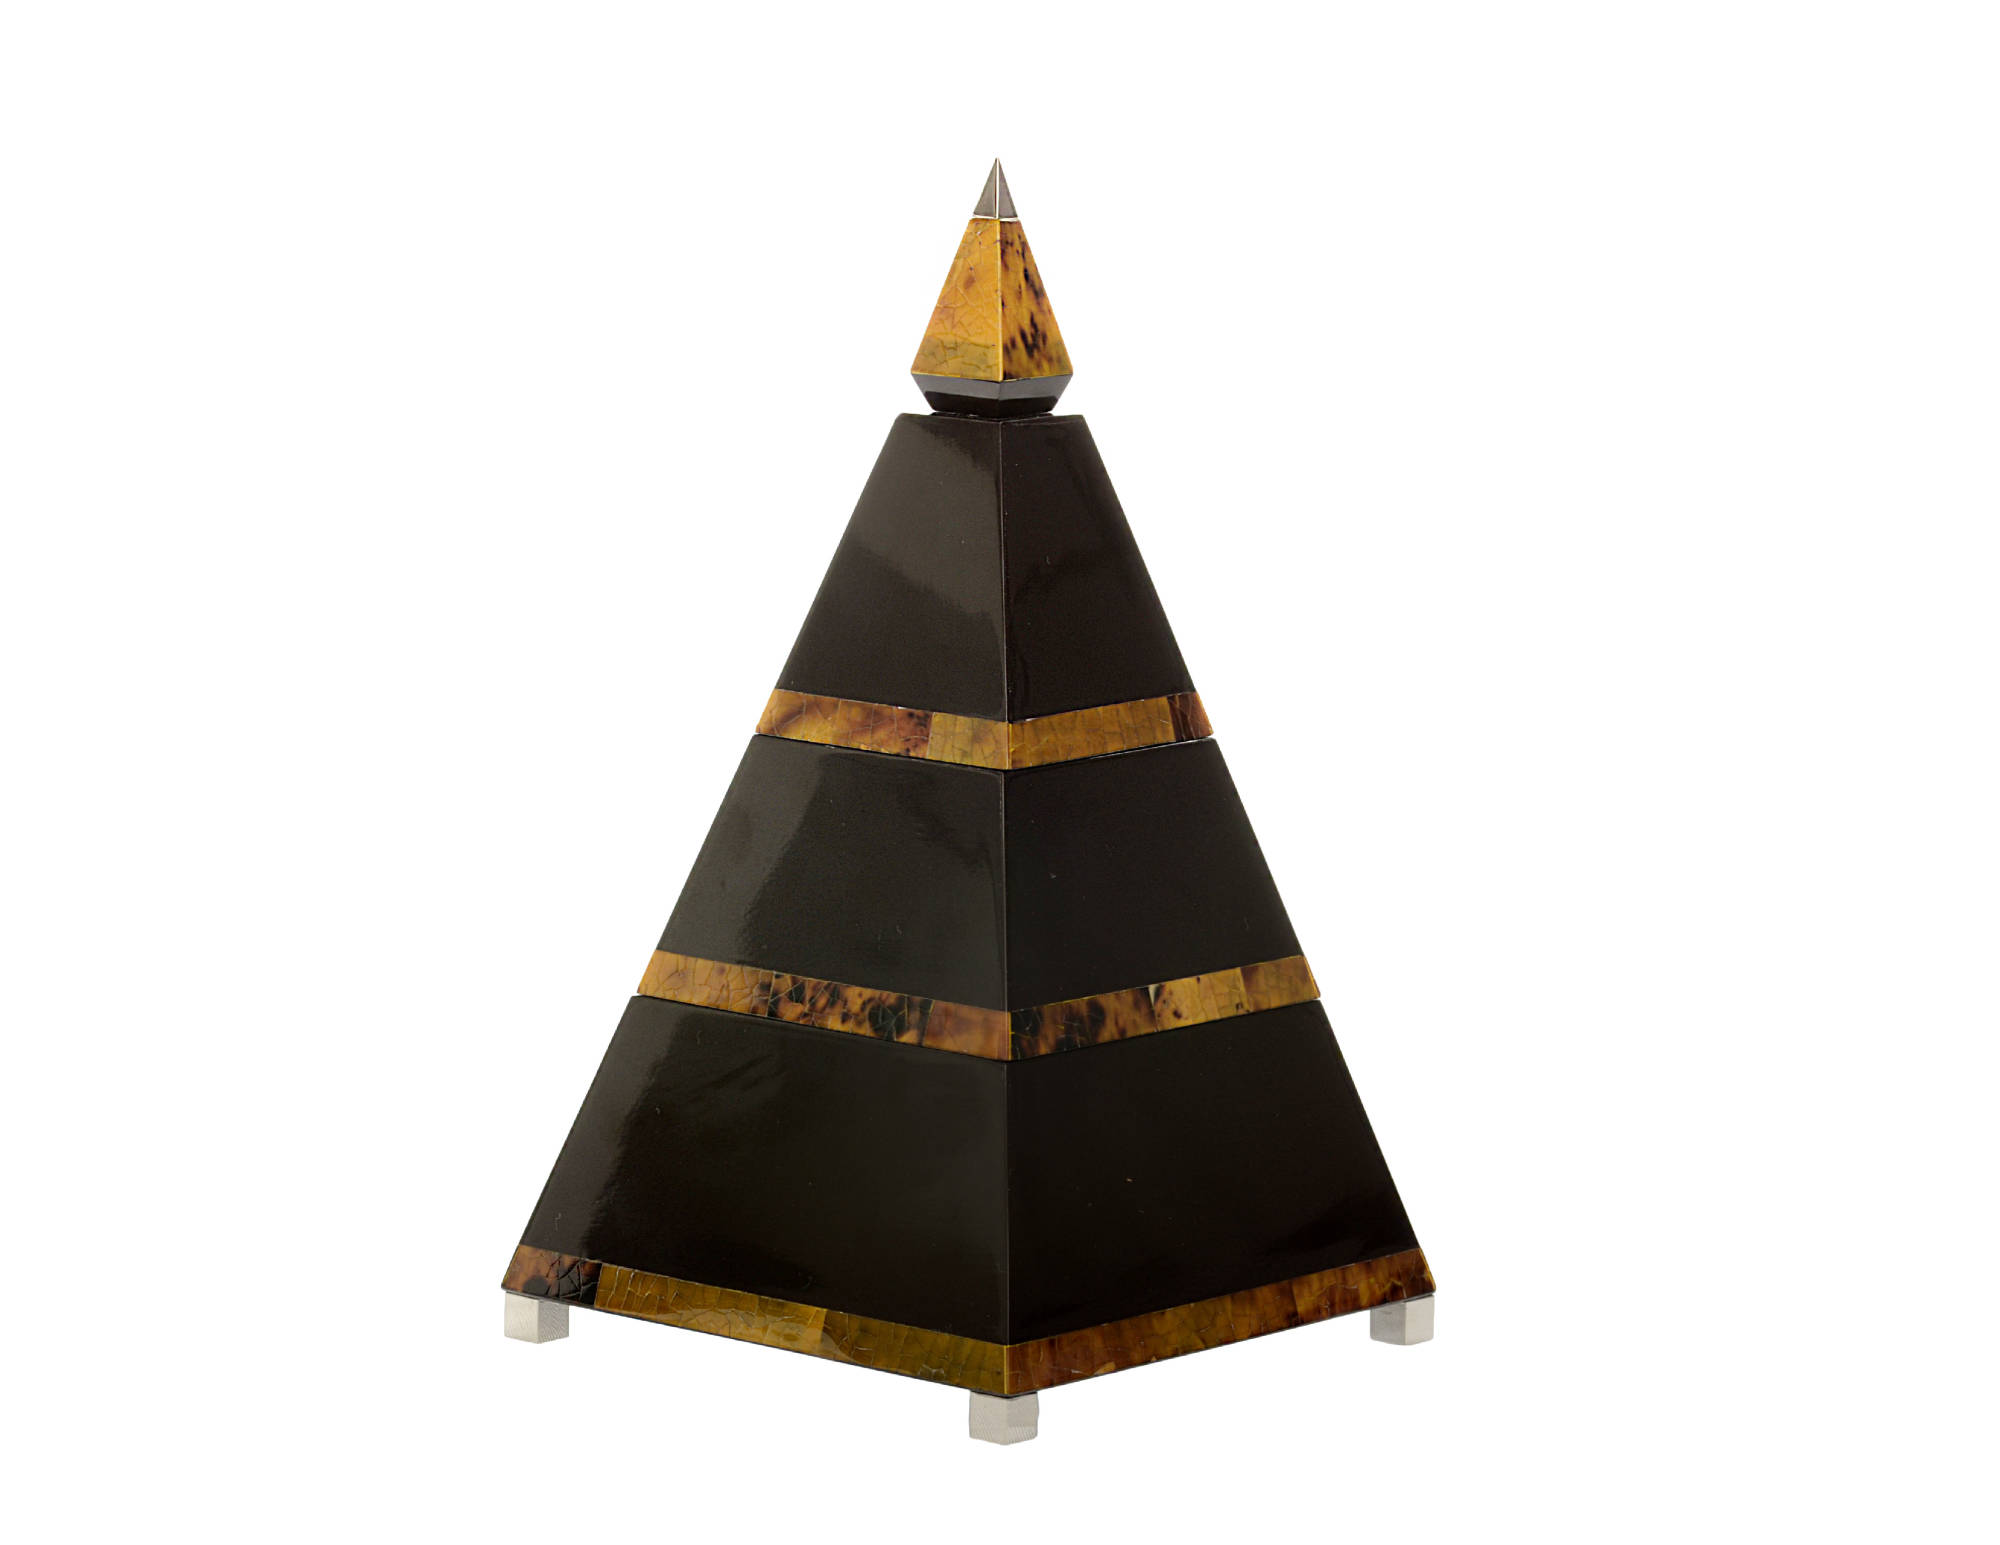 Pyramid box yellow tiger penshell trim & brown resin body with nickel plated handle and feet